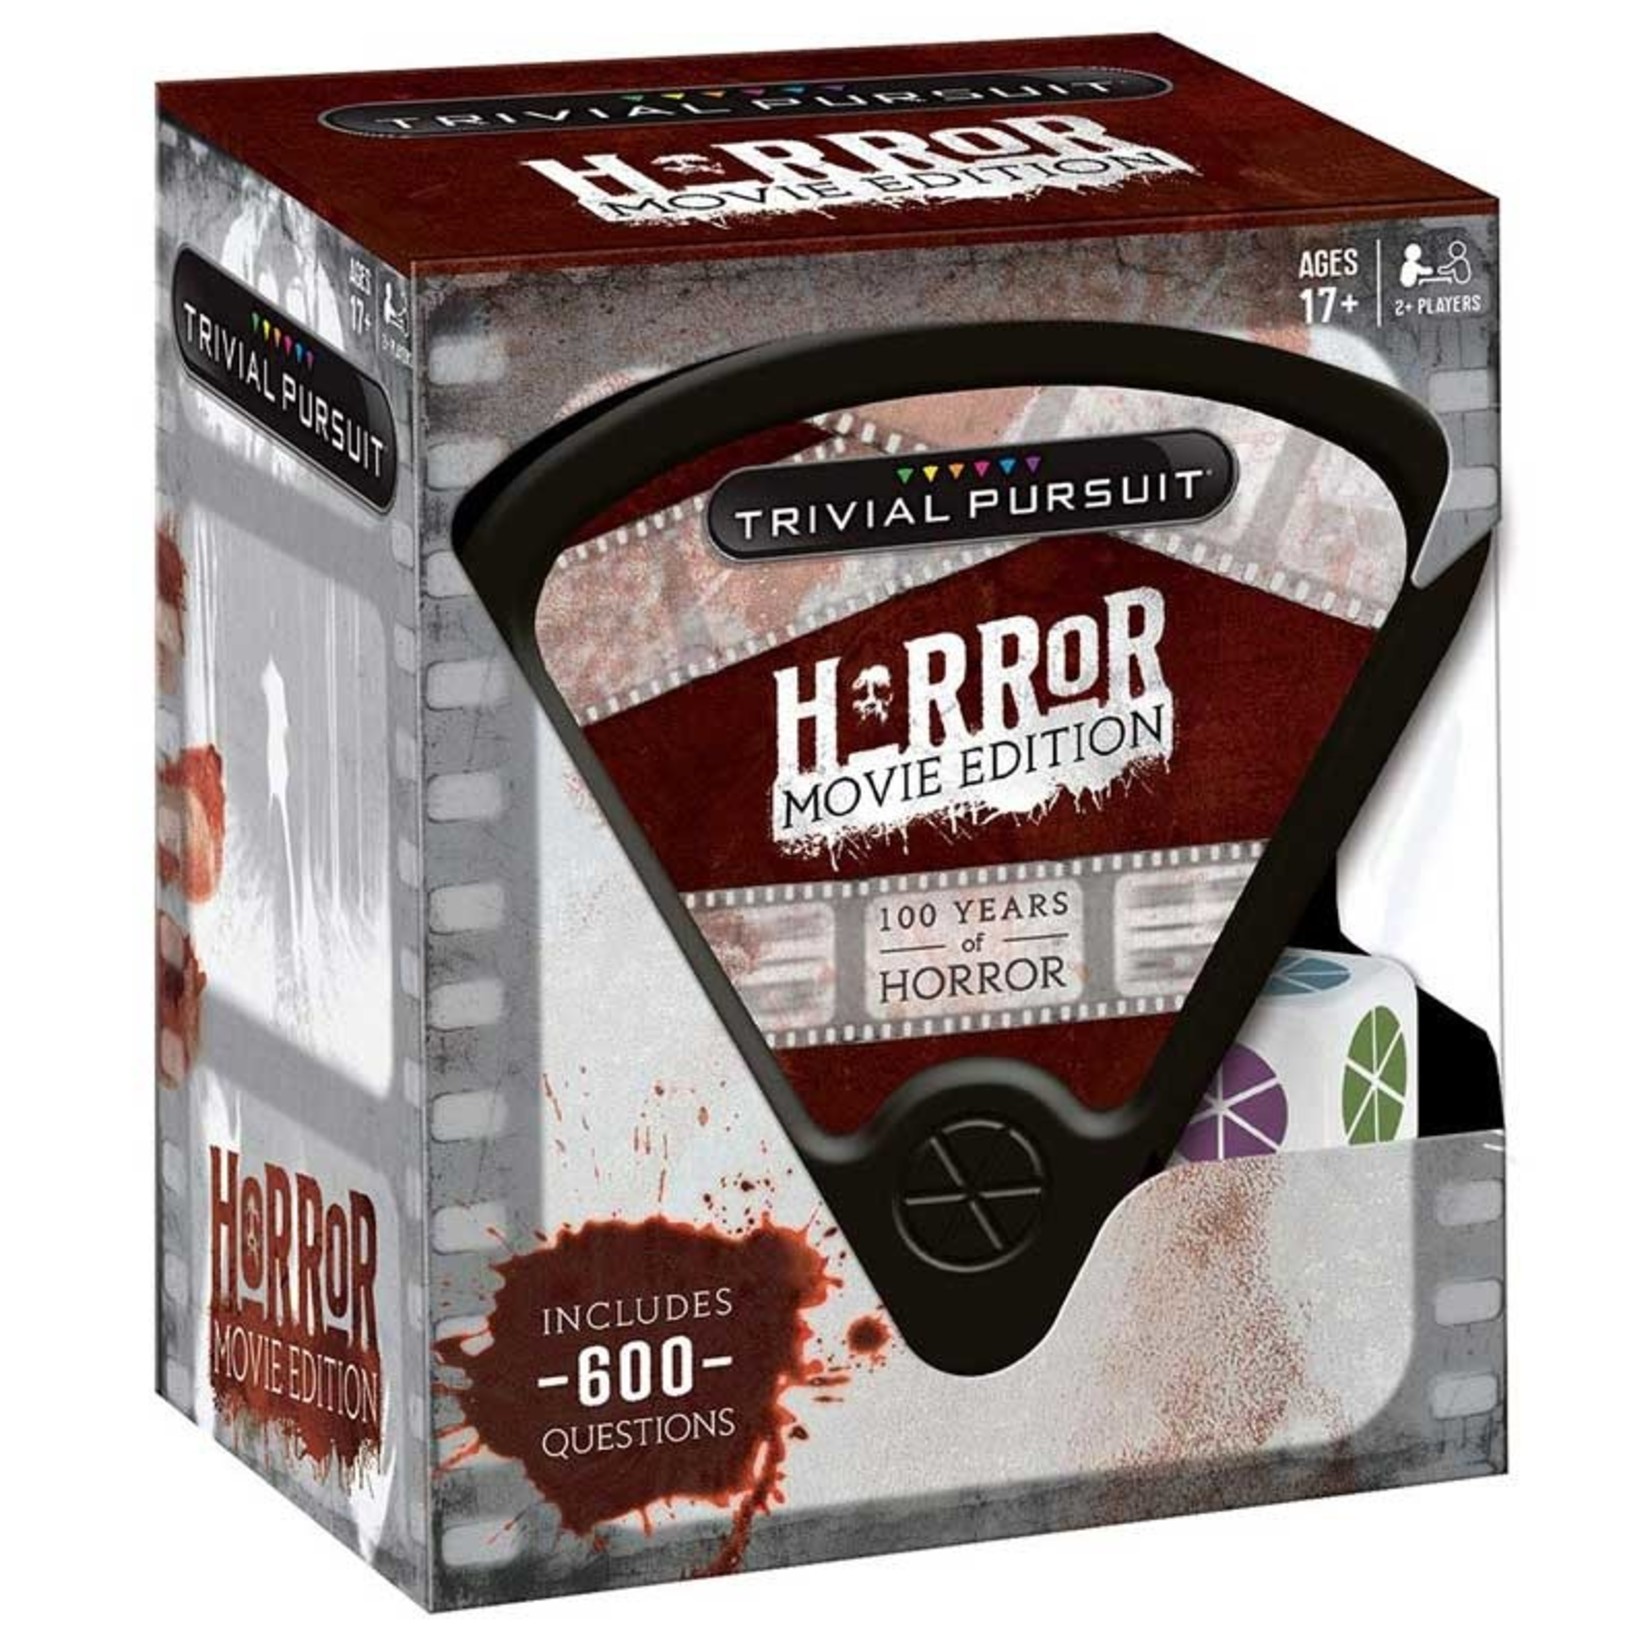 The Op Trivial Pursuit: Horror Movie Edition